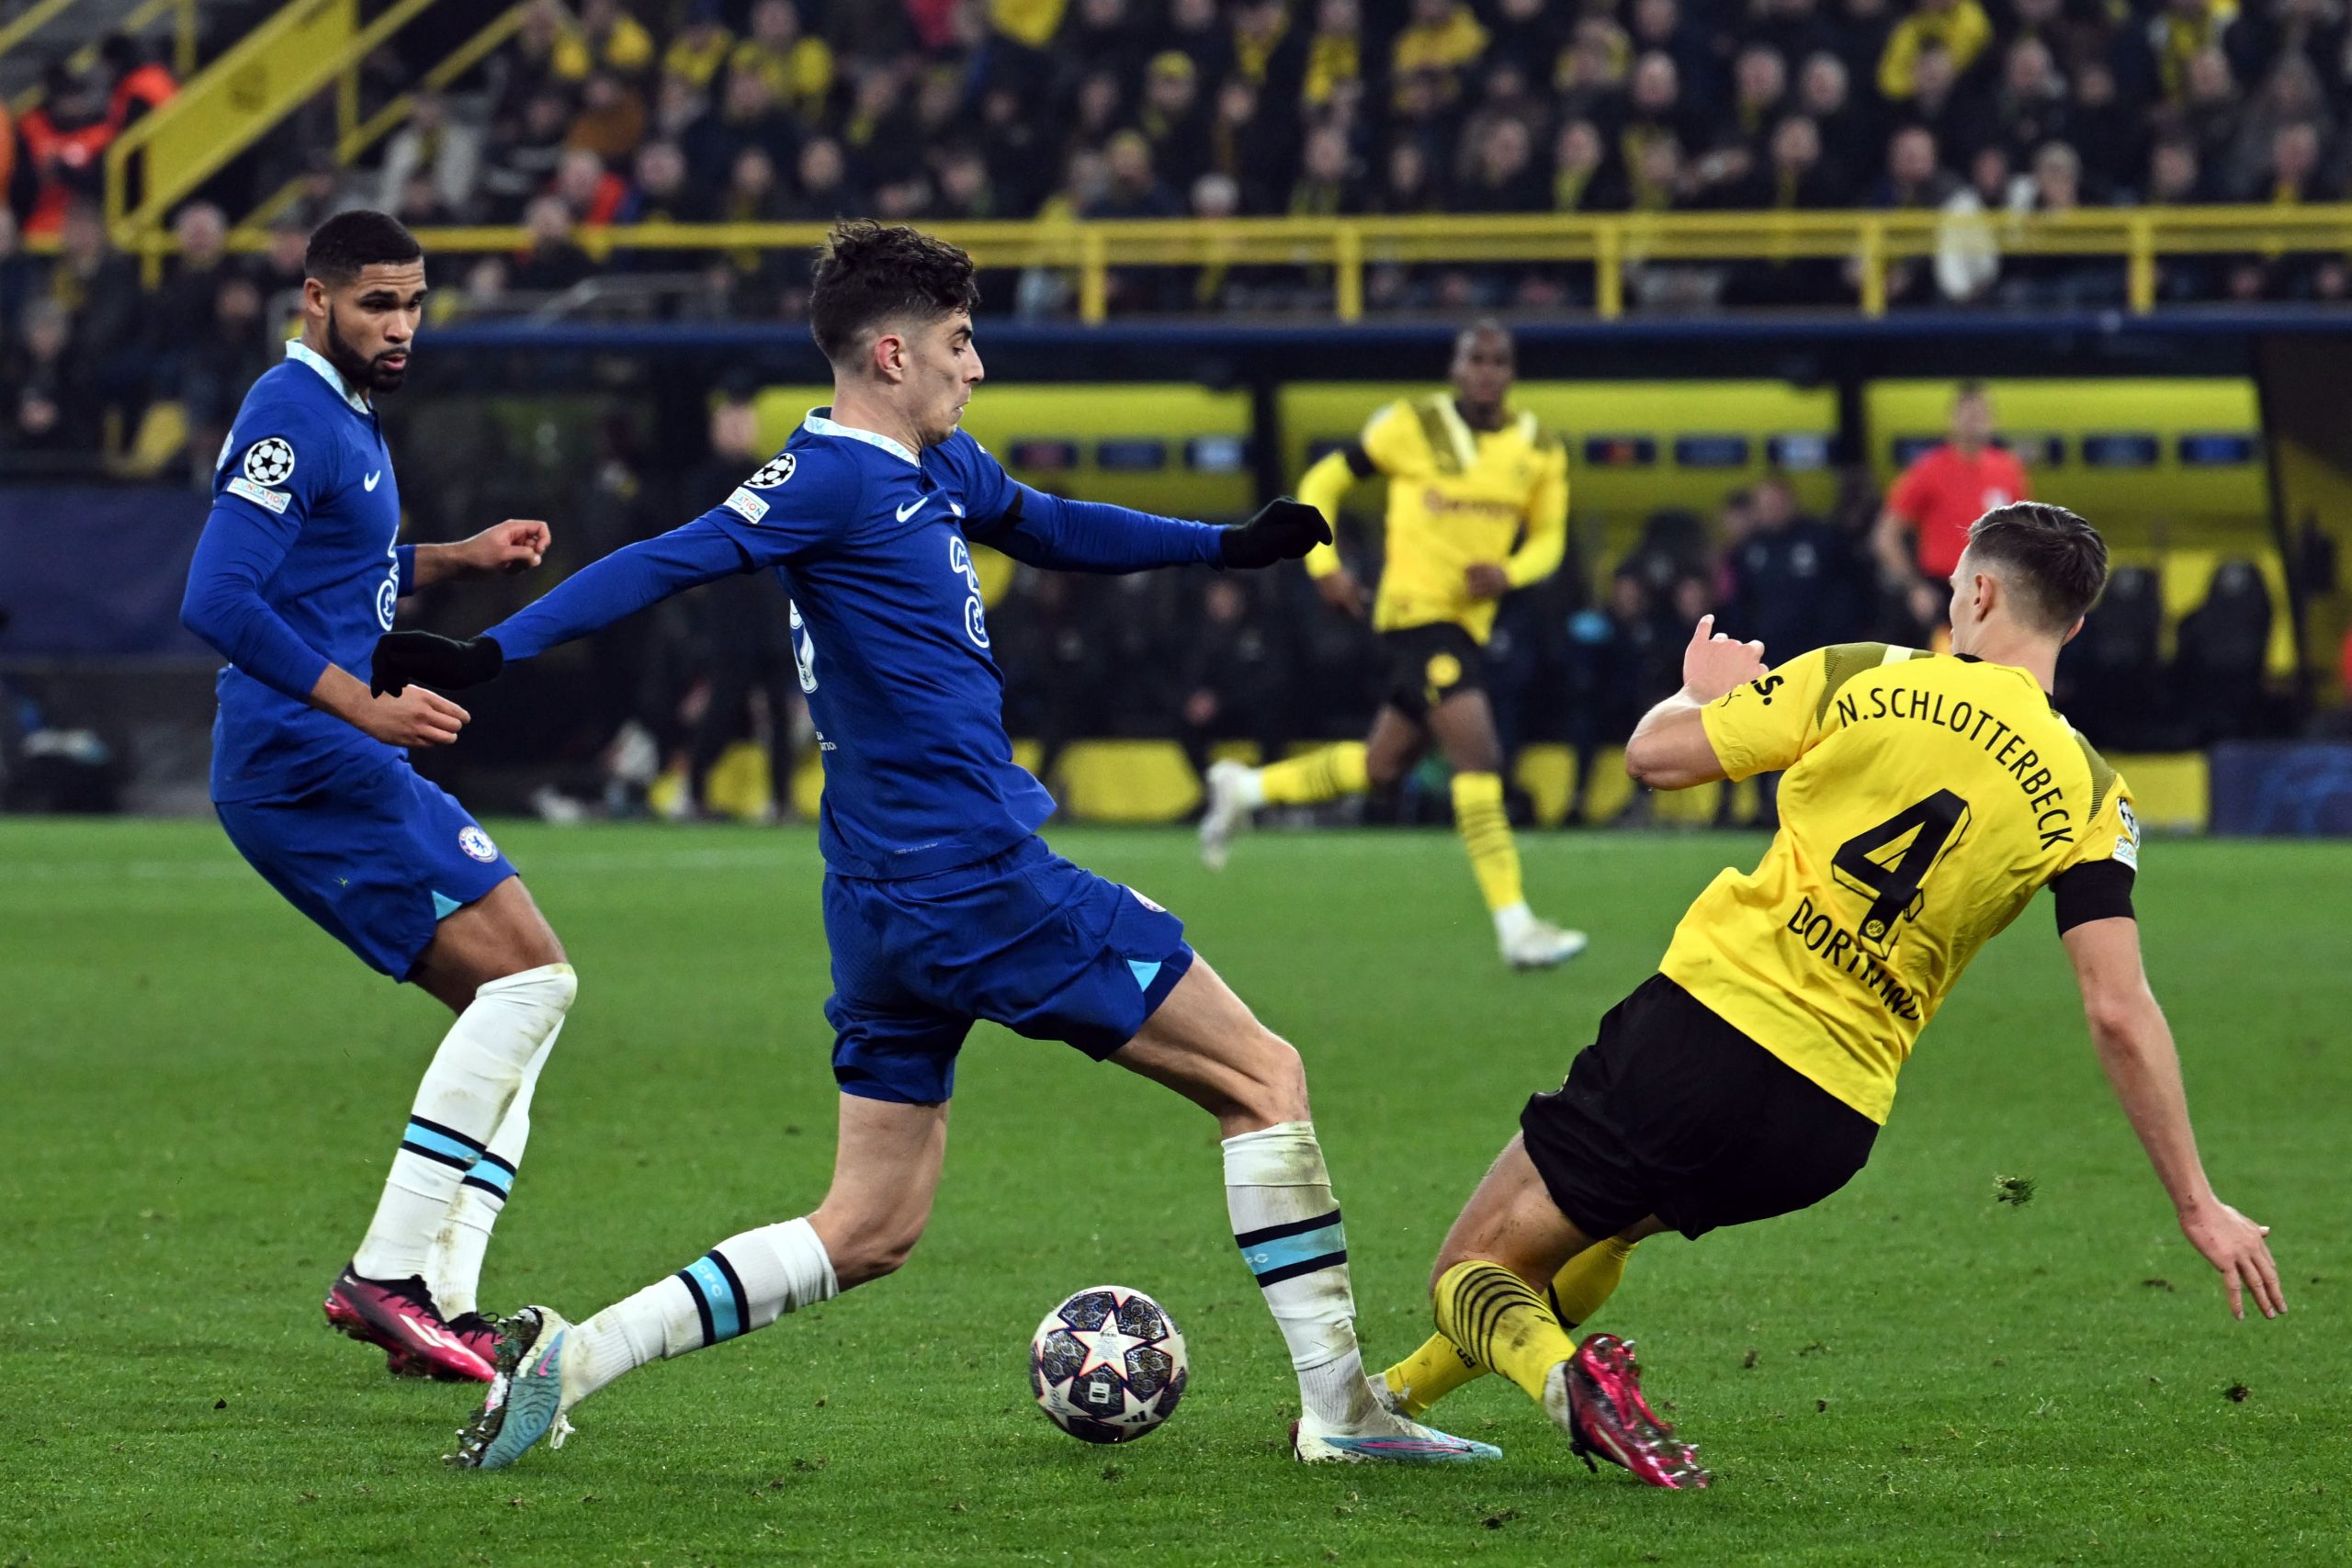 Champions League soccer predictions and UCL best bets for Tuesday 3/7: Don't doubt Dortmund